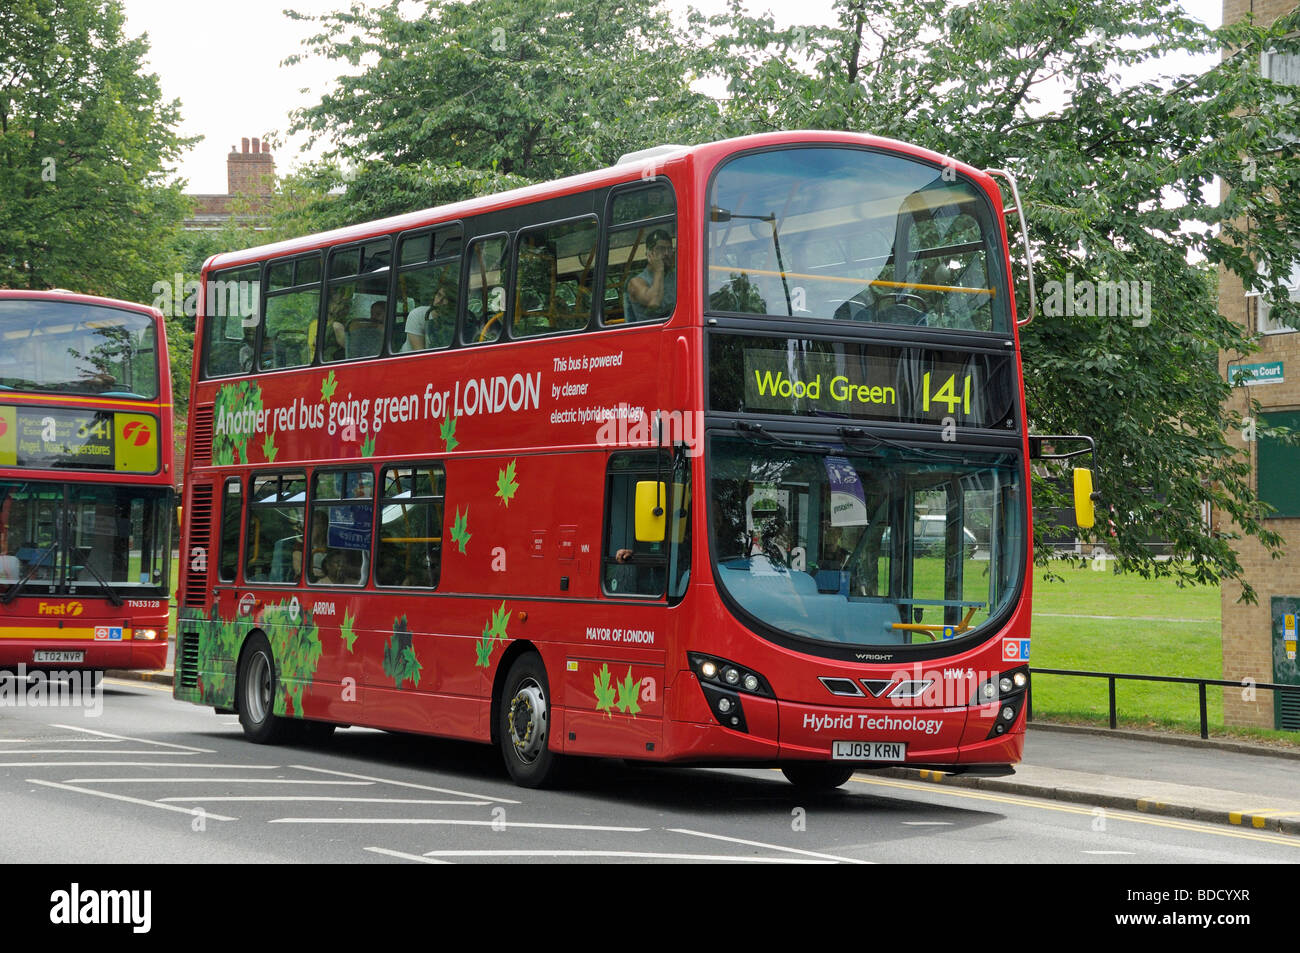 London bus powered by electric hybrid technology with 'Another red bus going green for London' printed on the side England UK Stock Photo